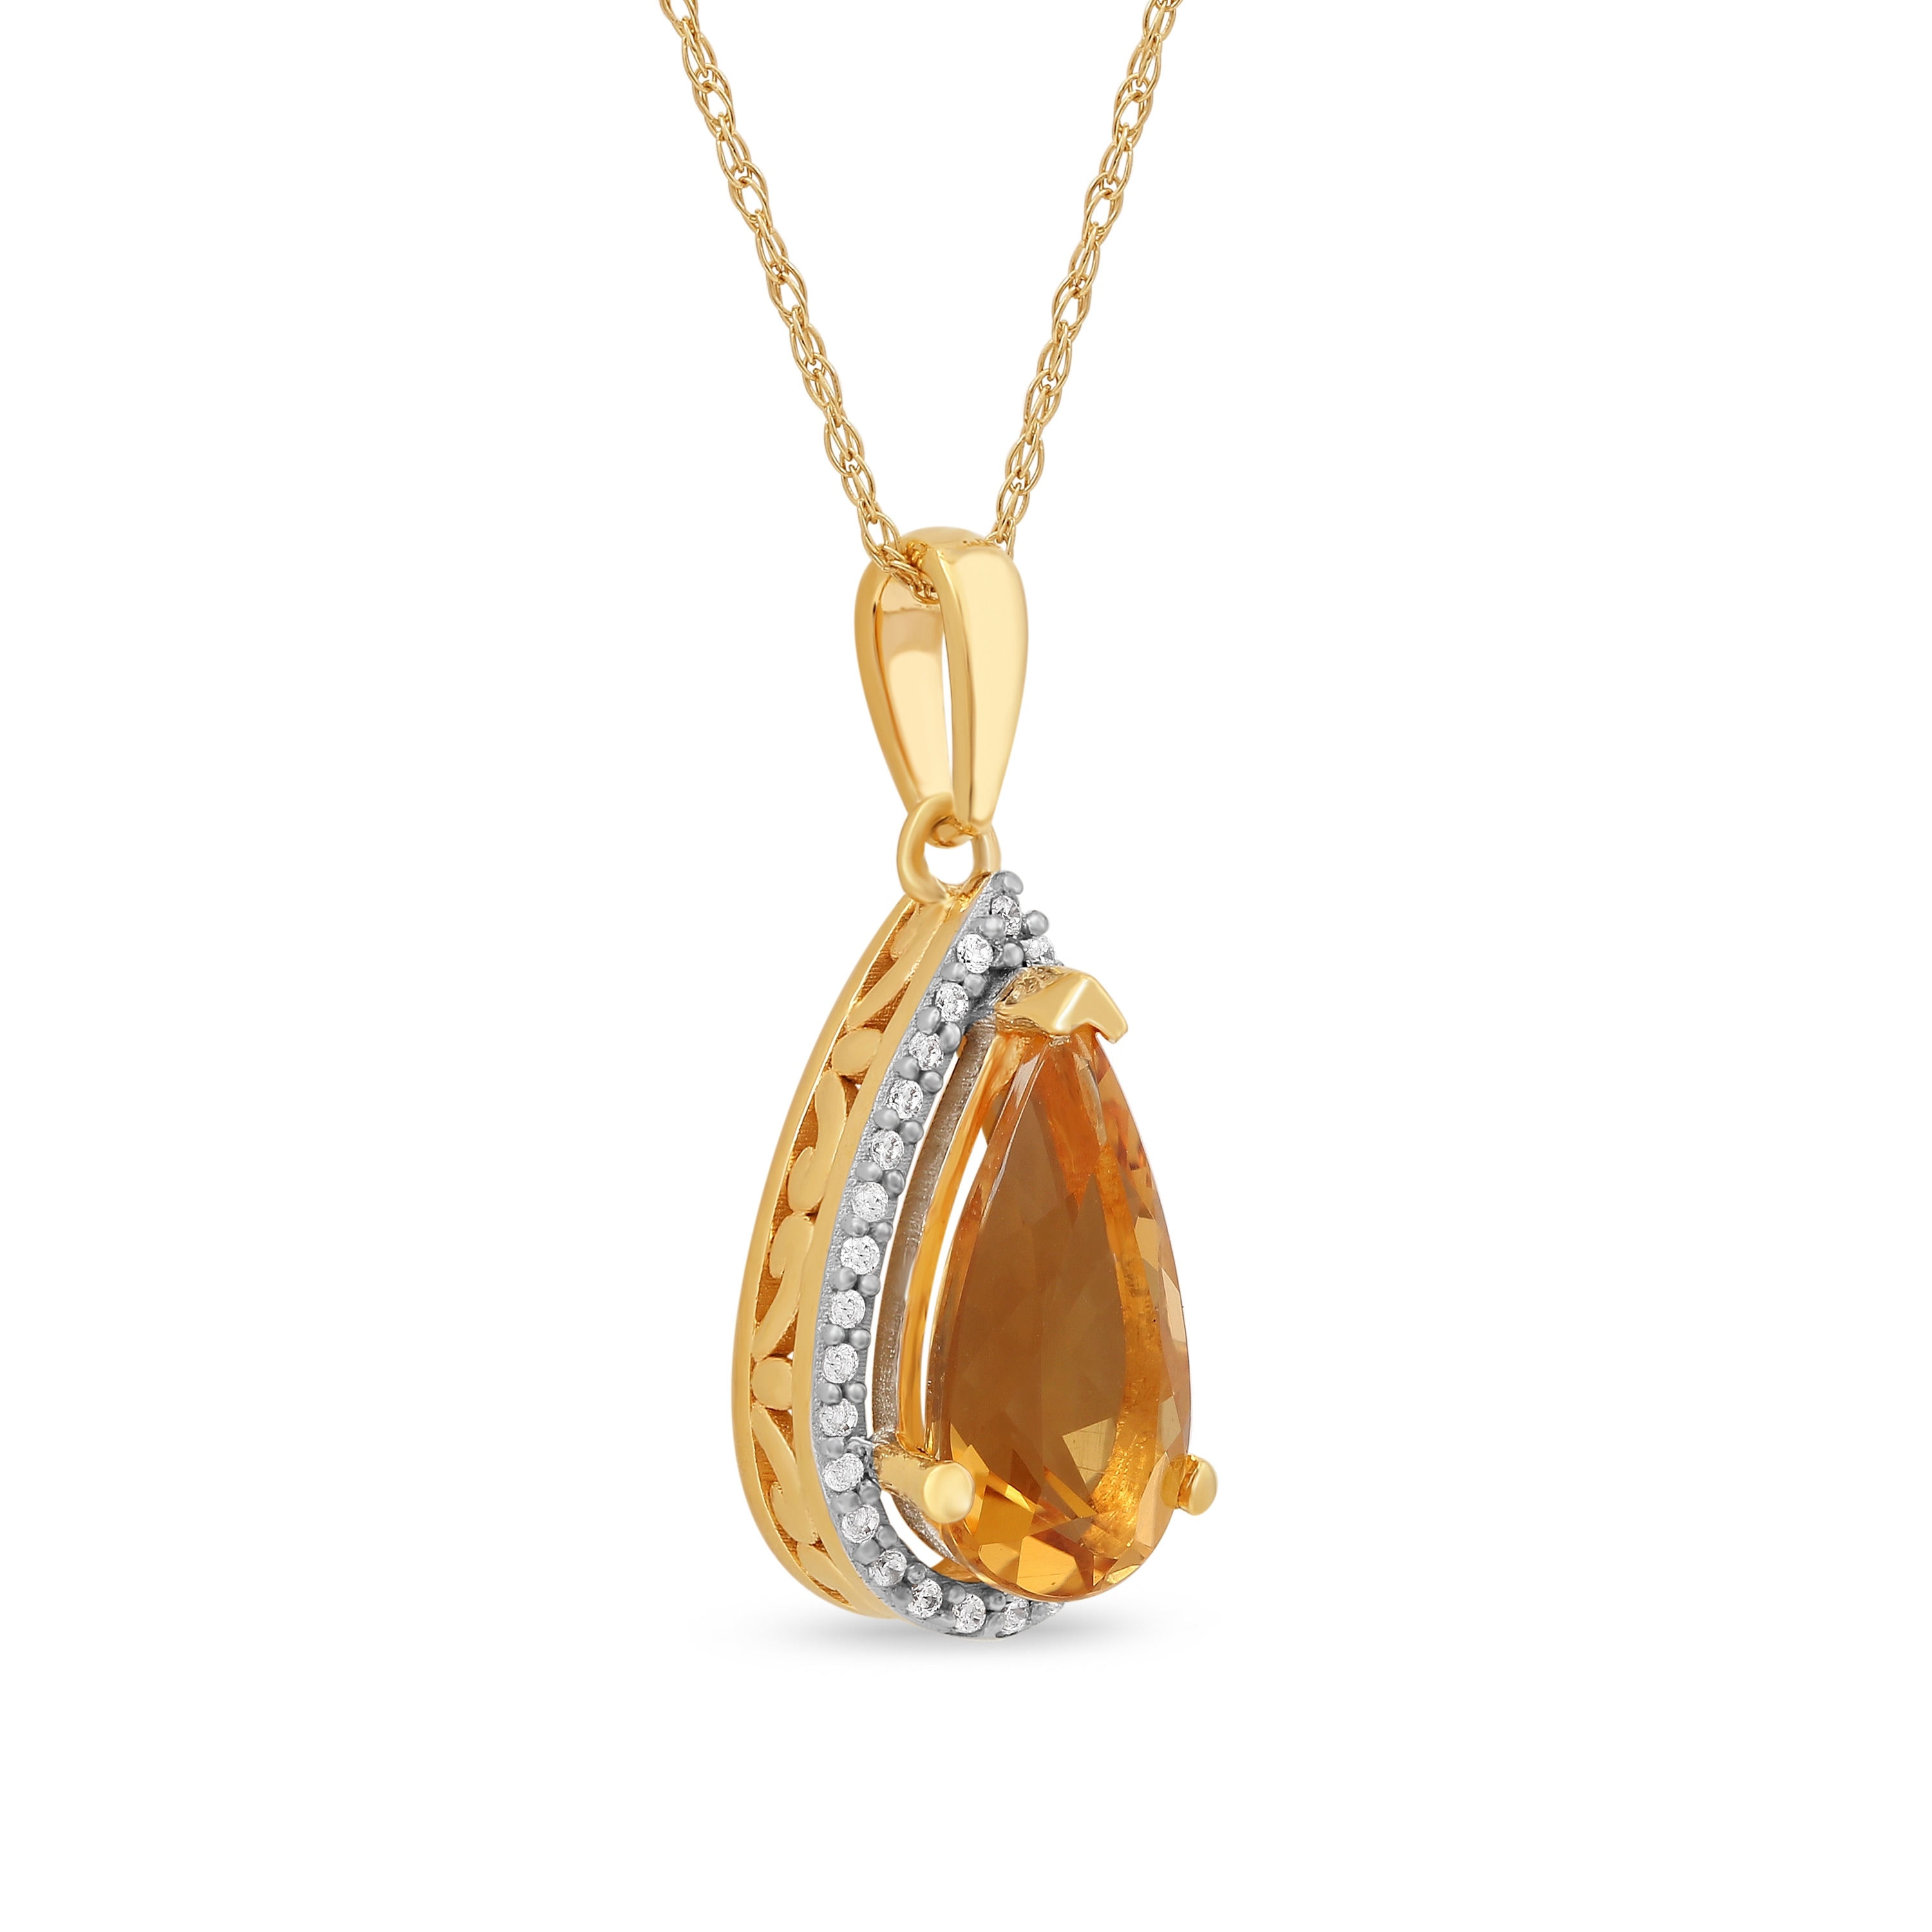 Details about   Citrine Handmade Natural Gemstone Pendant 4.23 Ct 10k Yellow Gold Jewelry